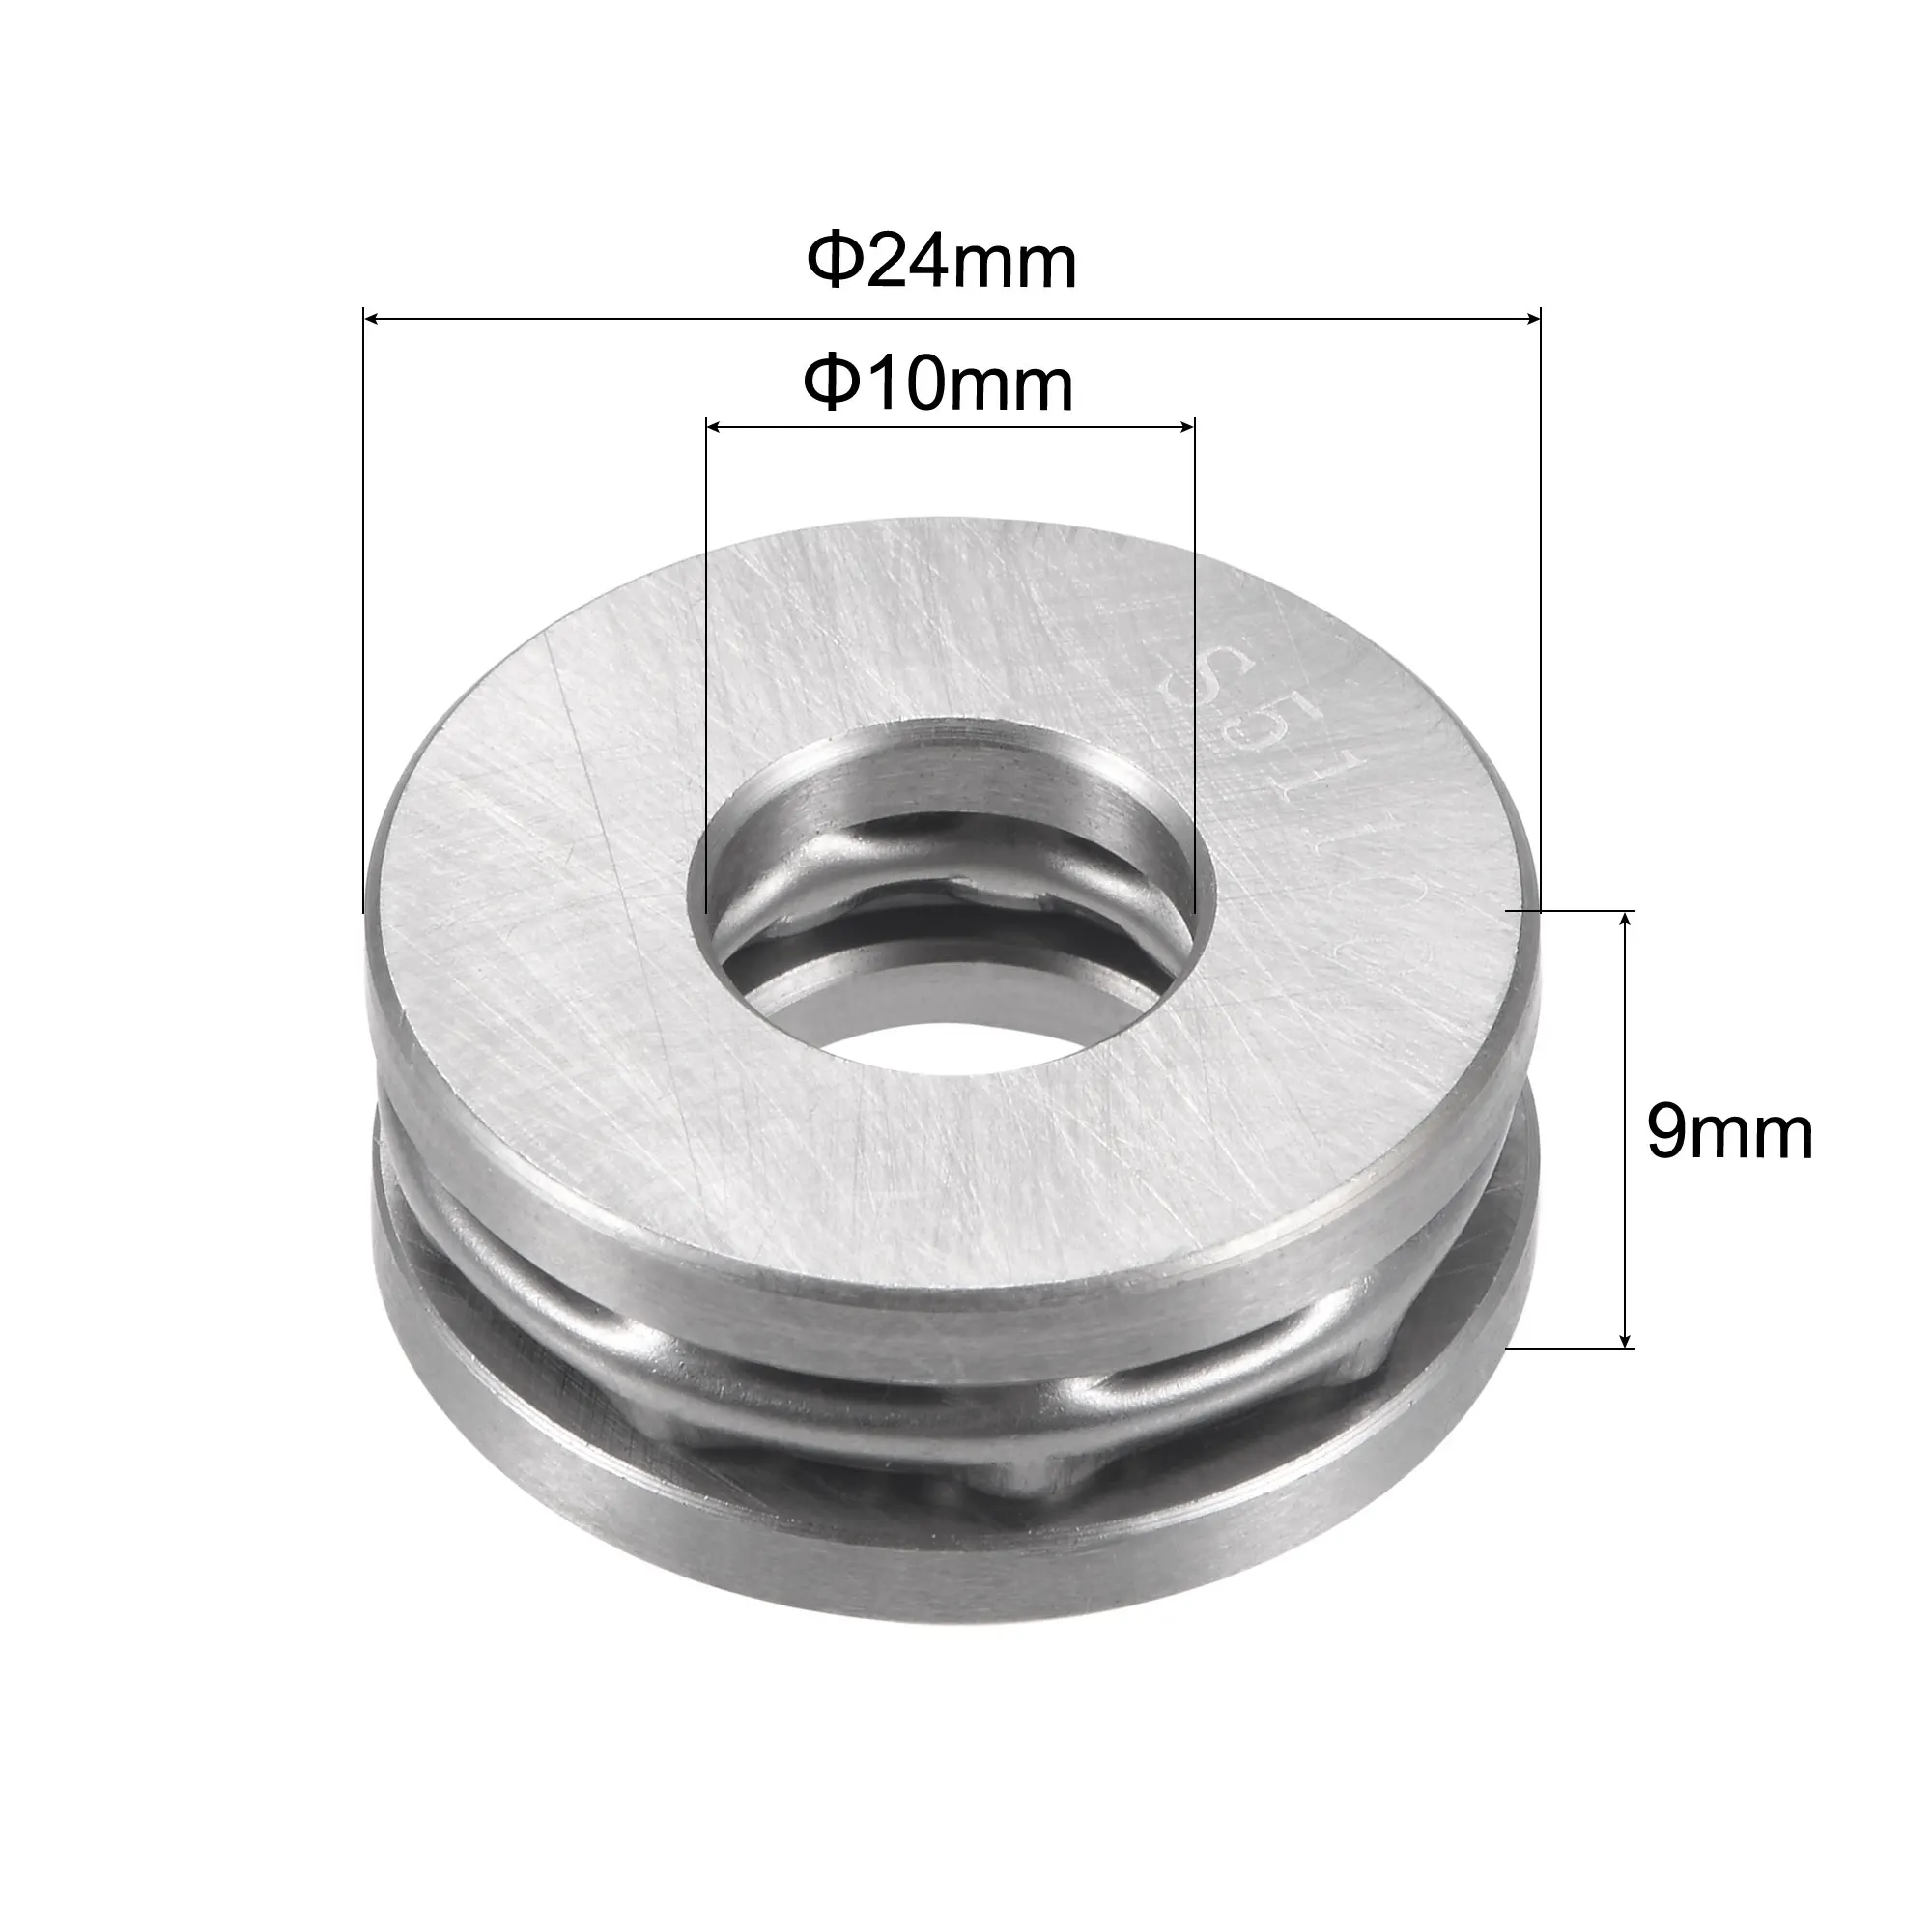 uxcell S51103 Thrust Ball Bearing 17mm Bore 30mm OD 9mm Thick Stainless Steel with Washers 2pcs 